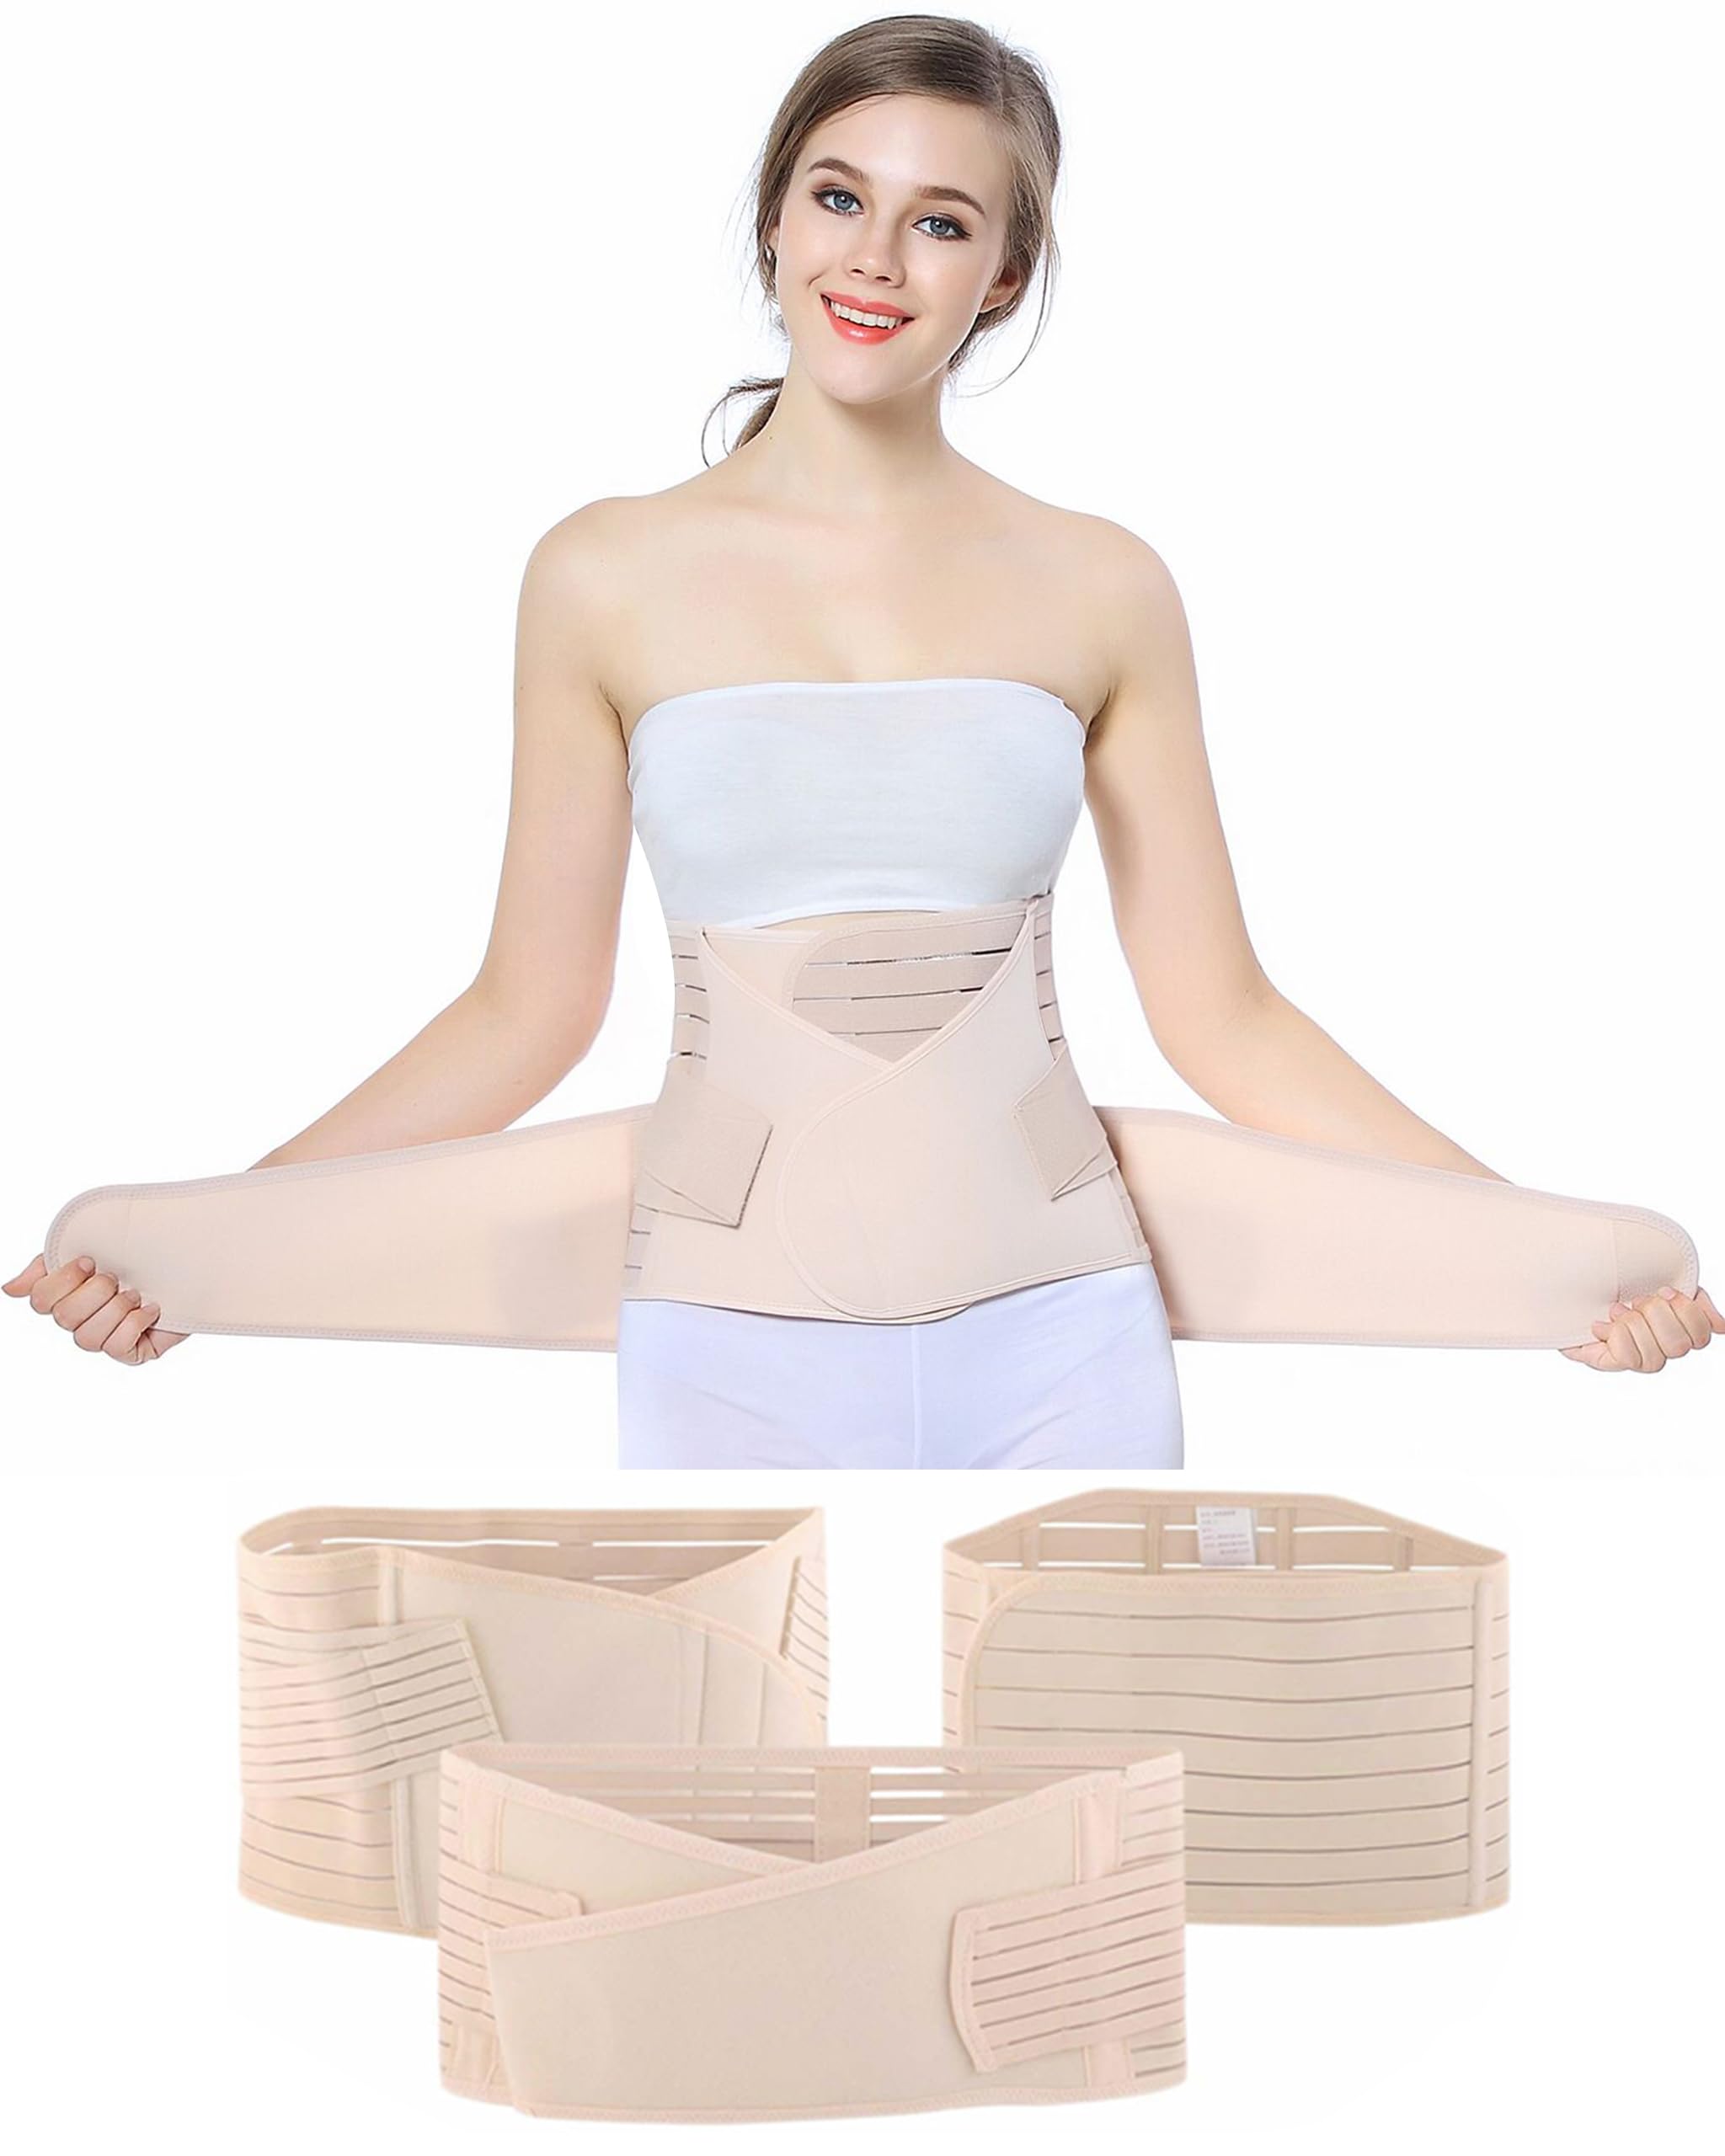 Postpartum Belly Wrap 3 in 1 Support Recovery Belt - C Section Belly Band,  Post Pregnancy Postnatal Maternity Girdles for Women Body Shaper - Post